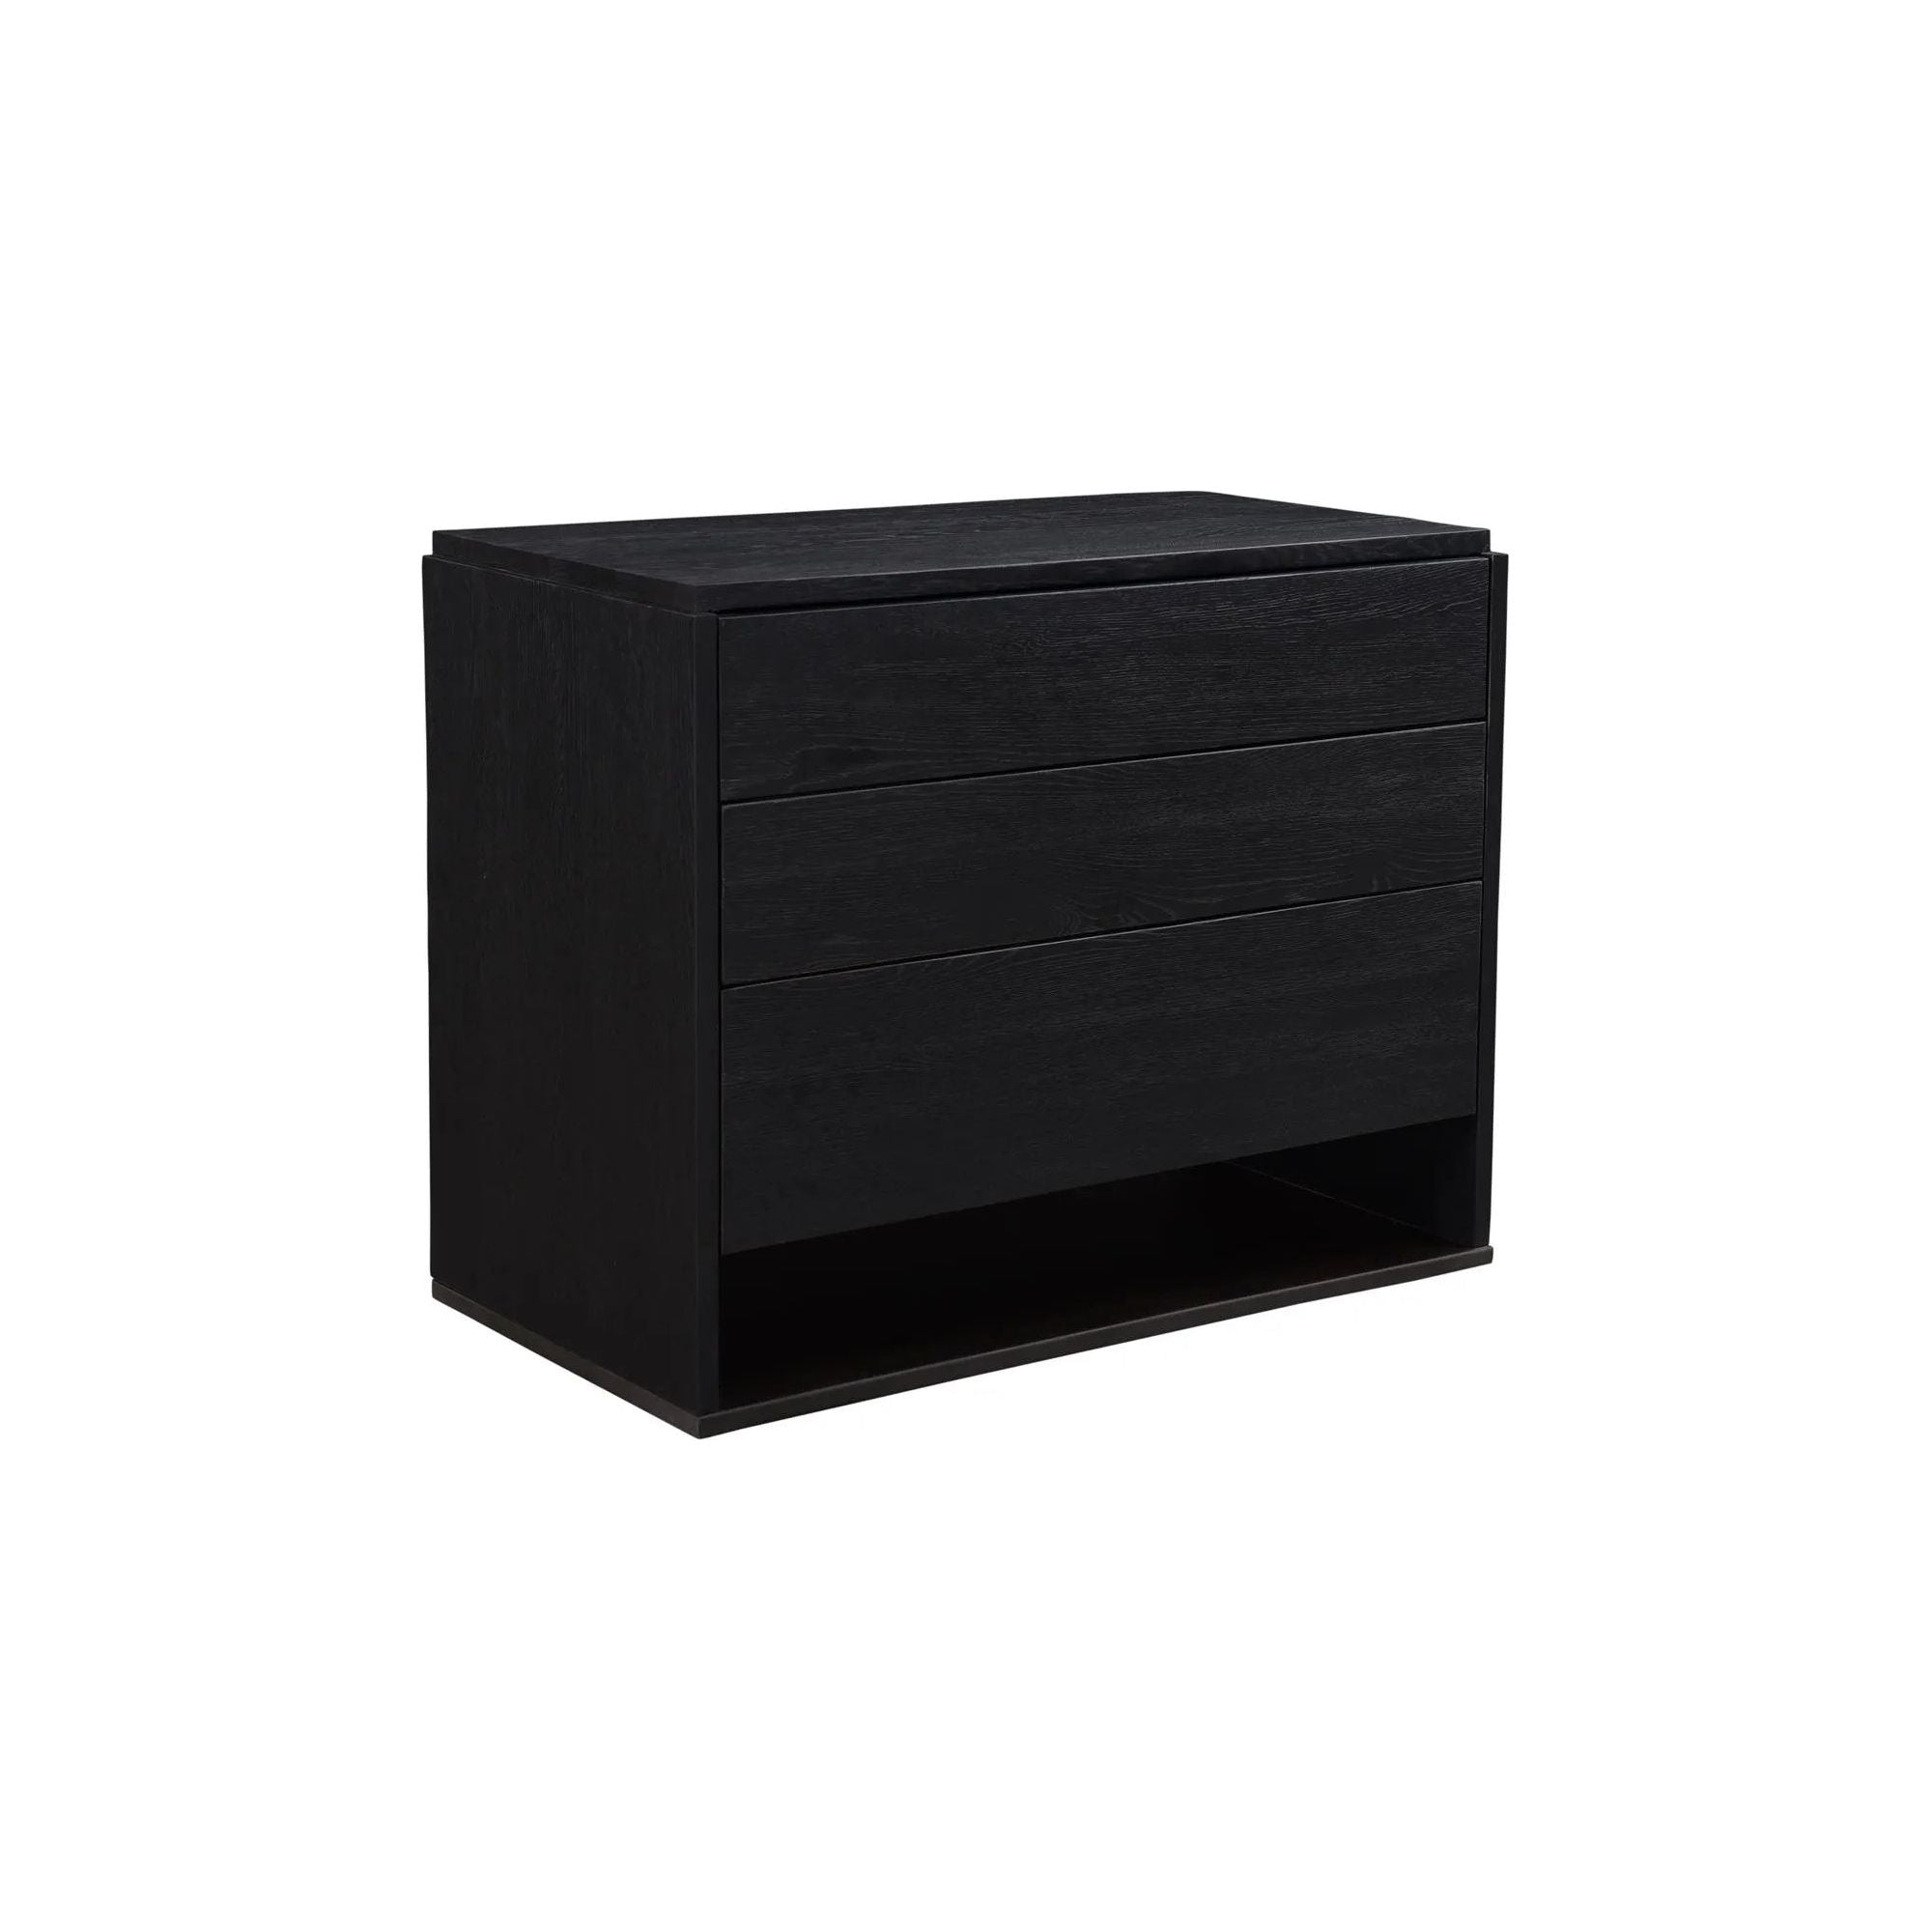 Bold in black, Quinton is a natural storage solution at home in any style. This solid oak chest of drawers is generously fitted with 3 spacious mango wood drawers. Supported by a sleek iron sheet base, Quinton is all clean lines for a seamless, contemporary finish—a handy storage essential Amethyst Home provides interior design, new home construction design consulting, vintage area rugs, and lighting in the Winter Garden metro area.